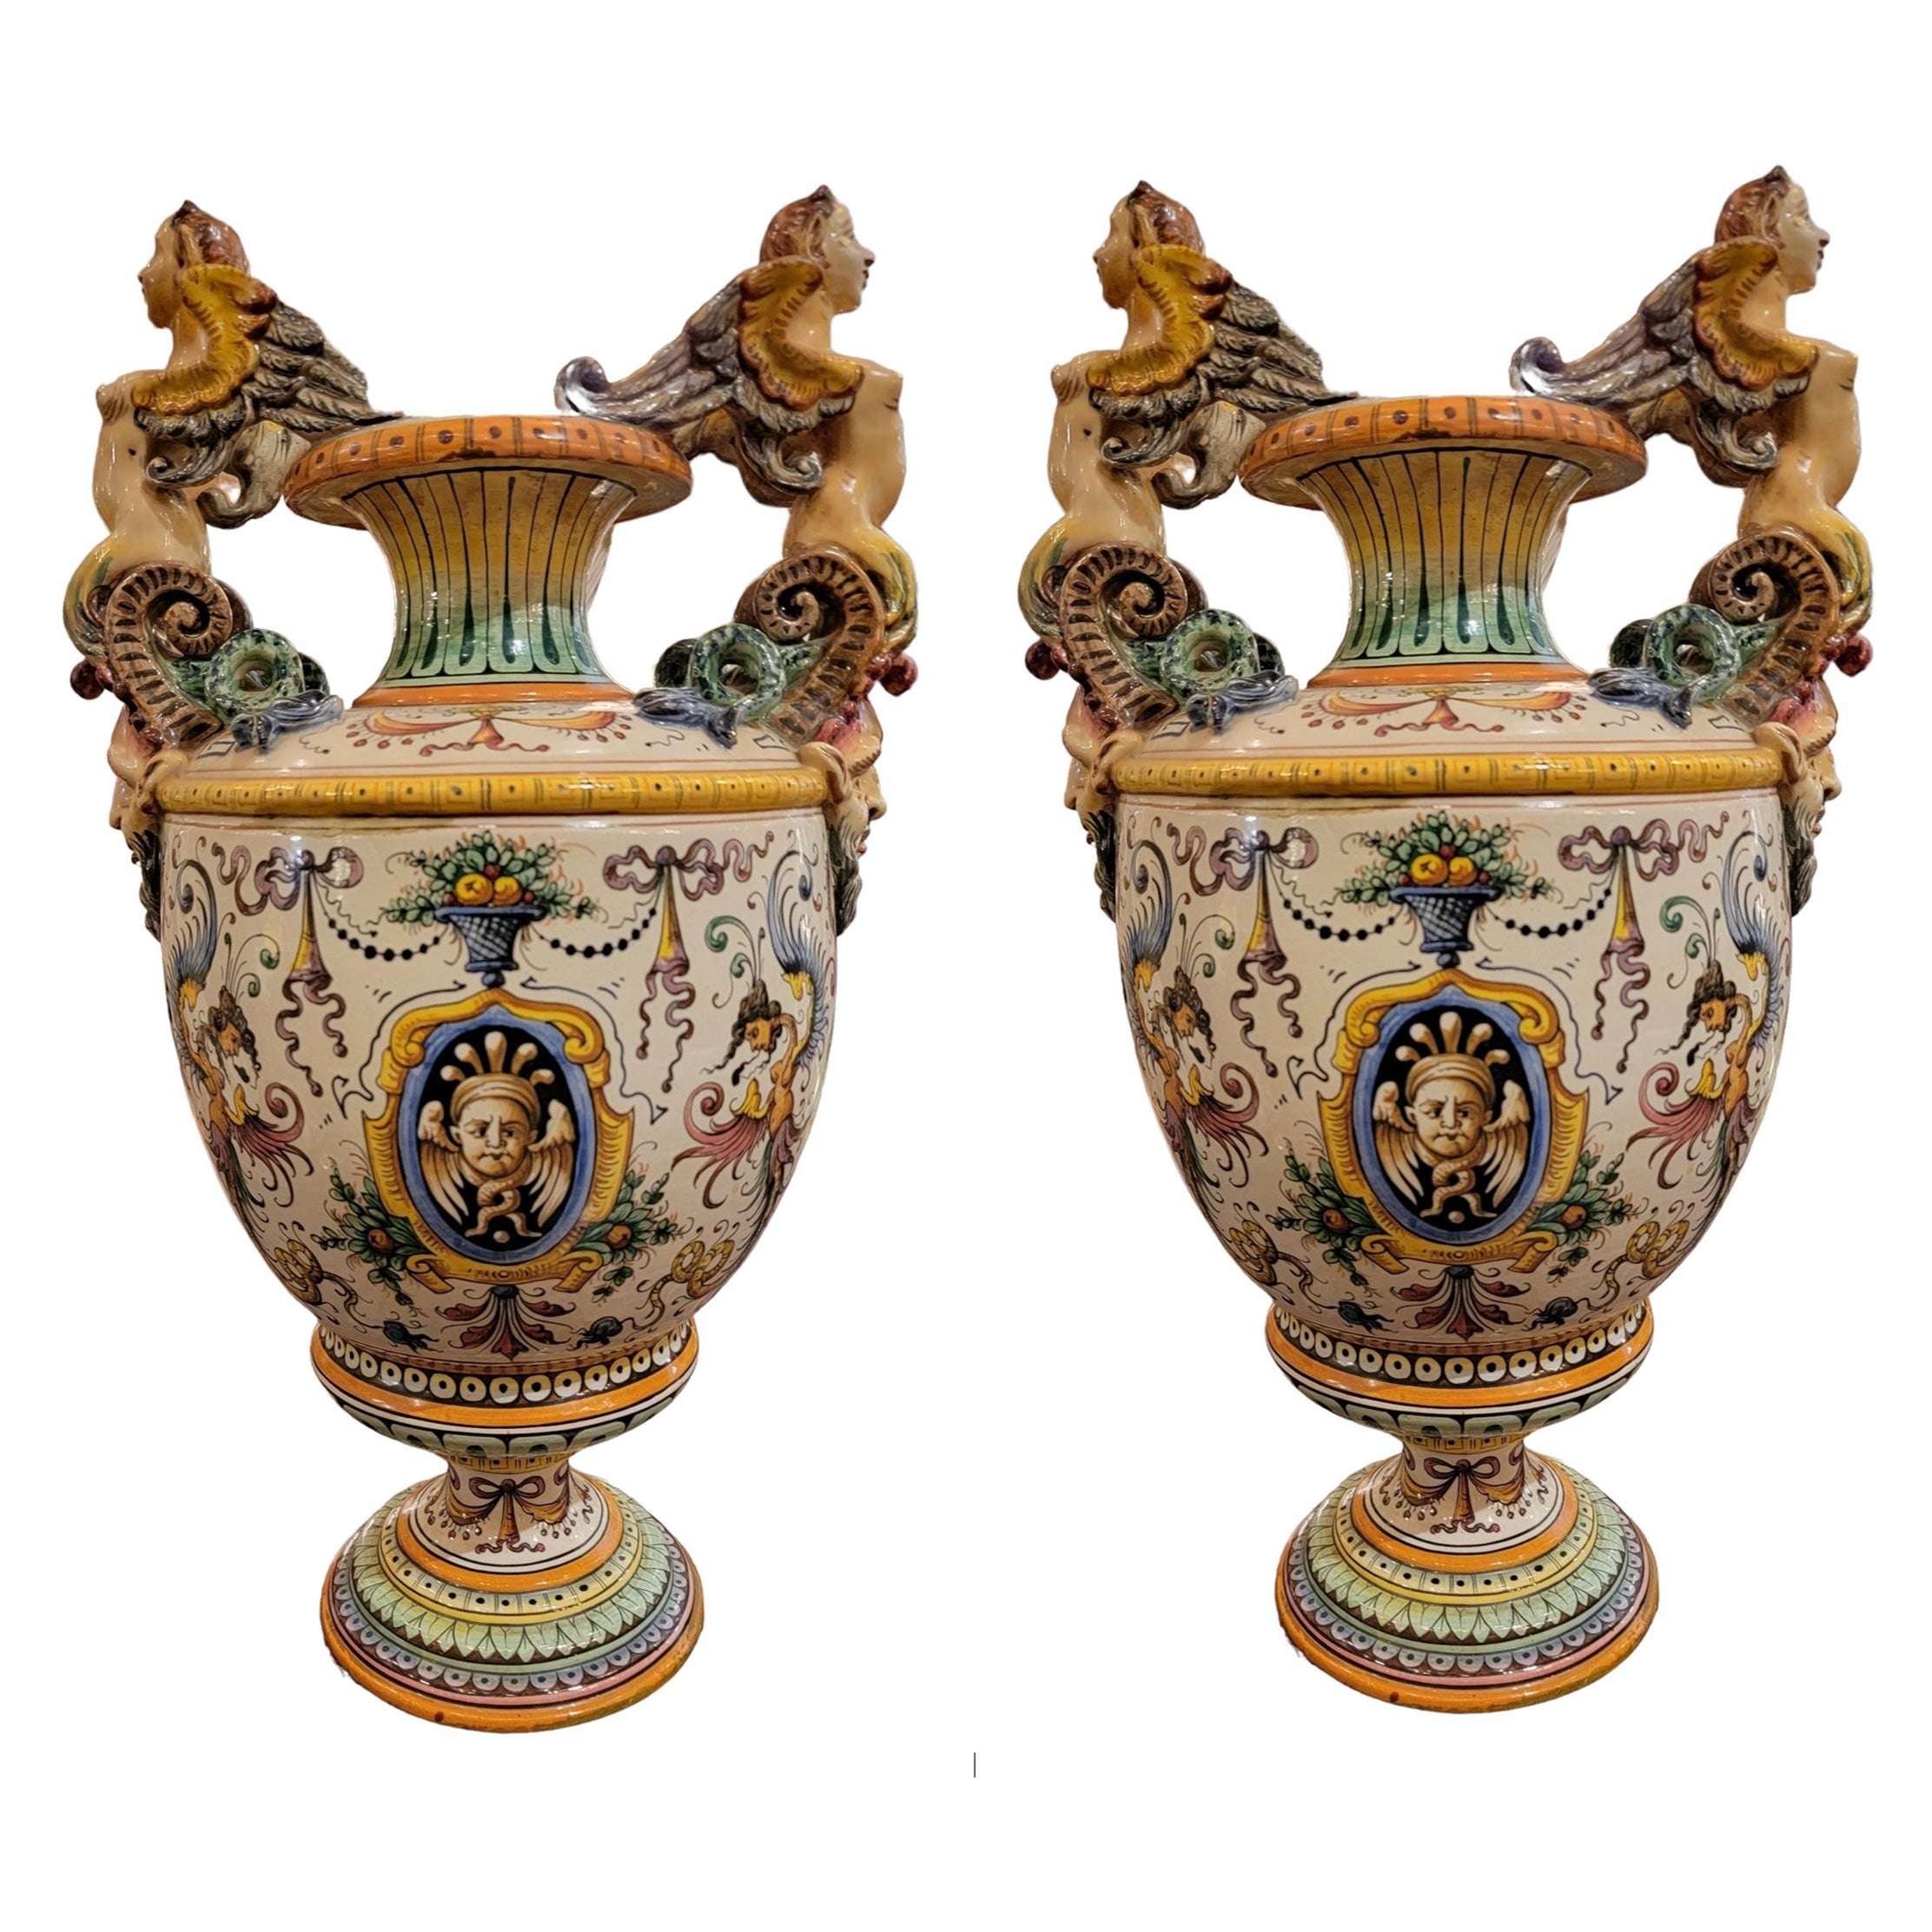 Large Antique Italian Faience Urn For Sale at 1stDibs